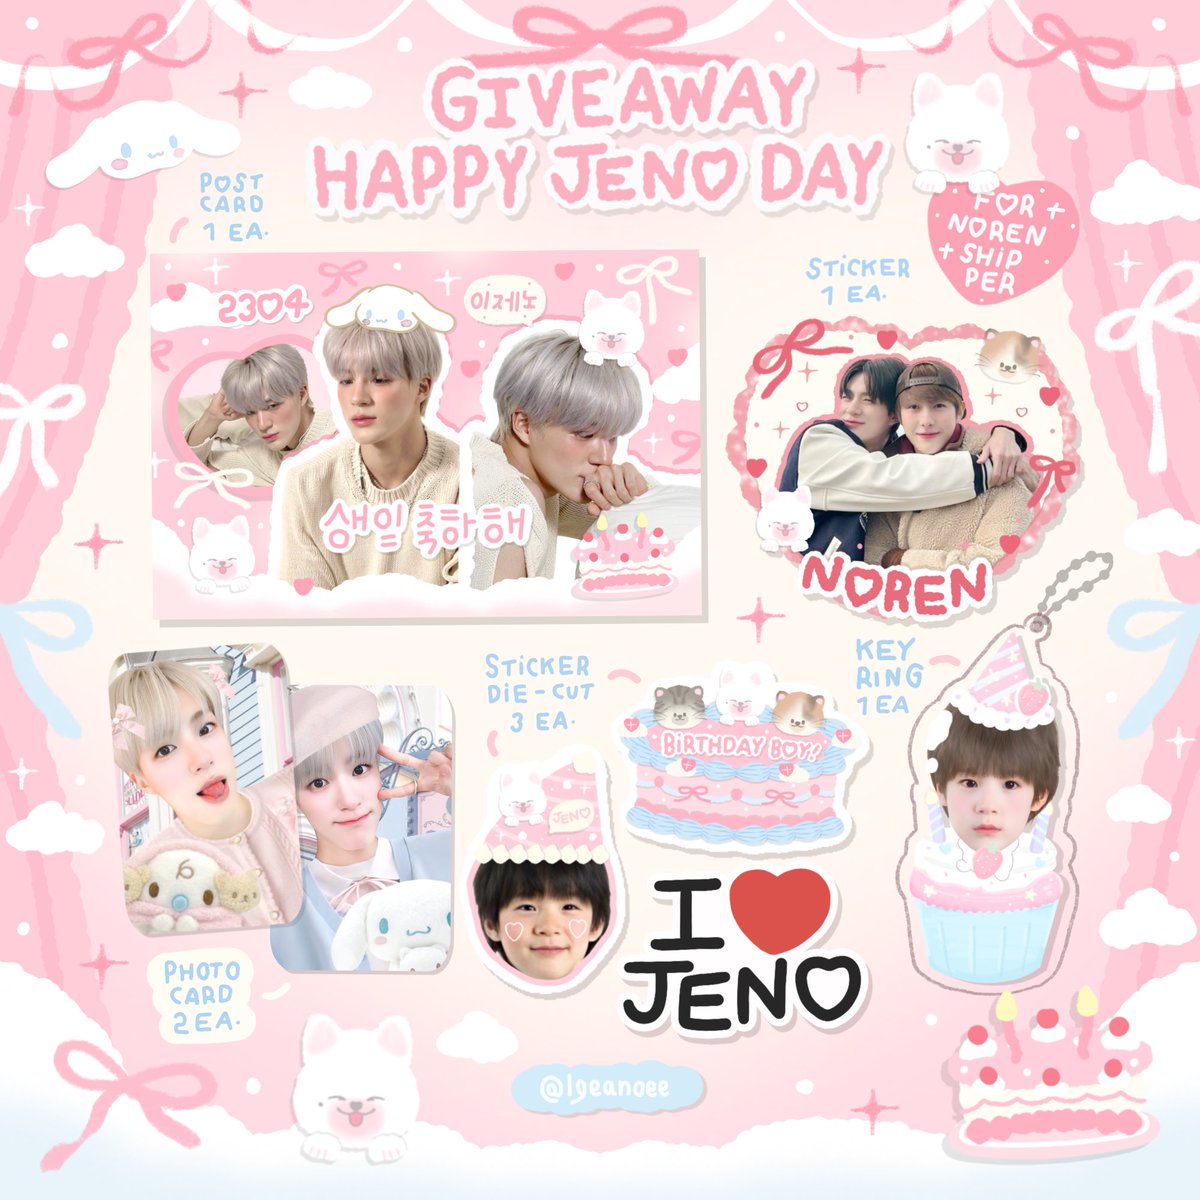 ˚⋆𐙚｡ pls kindly rt  ⋆｡

🐾 giveaway Jeno birthday
#HAPPYJENODAY 🎀🧁
 
♡ saim 5 set 
20/04 , time : tba

♡ cafe oldschoolbrownieshouse 7 set
20/04 #jenocupidclub 11:00-12:00

♡ rt + show this tweet 

˳✧༚ for exchange pls dm 💌
— more details in mention

#JENO #NCTDREAM